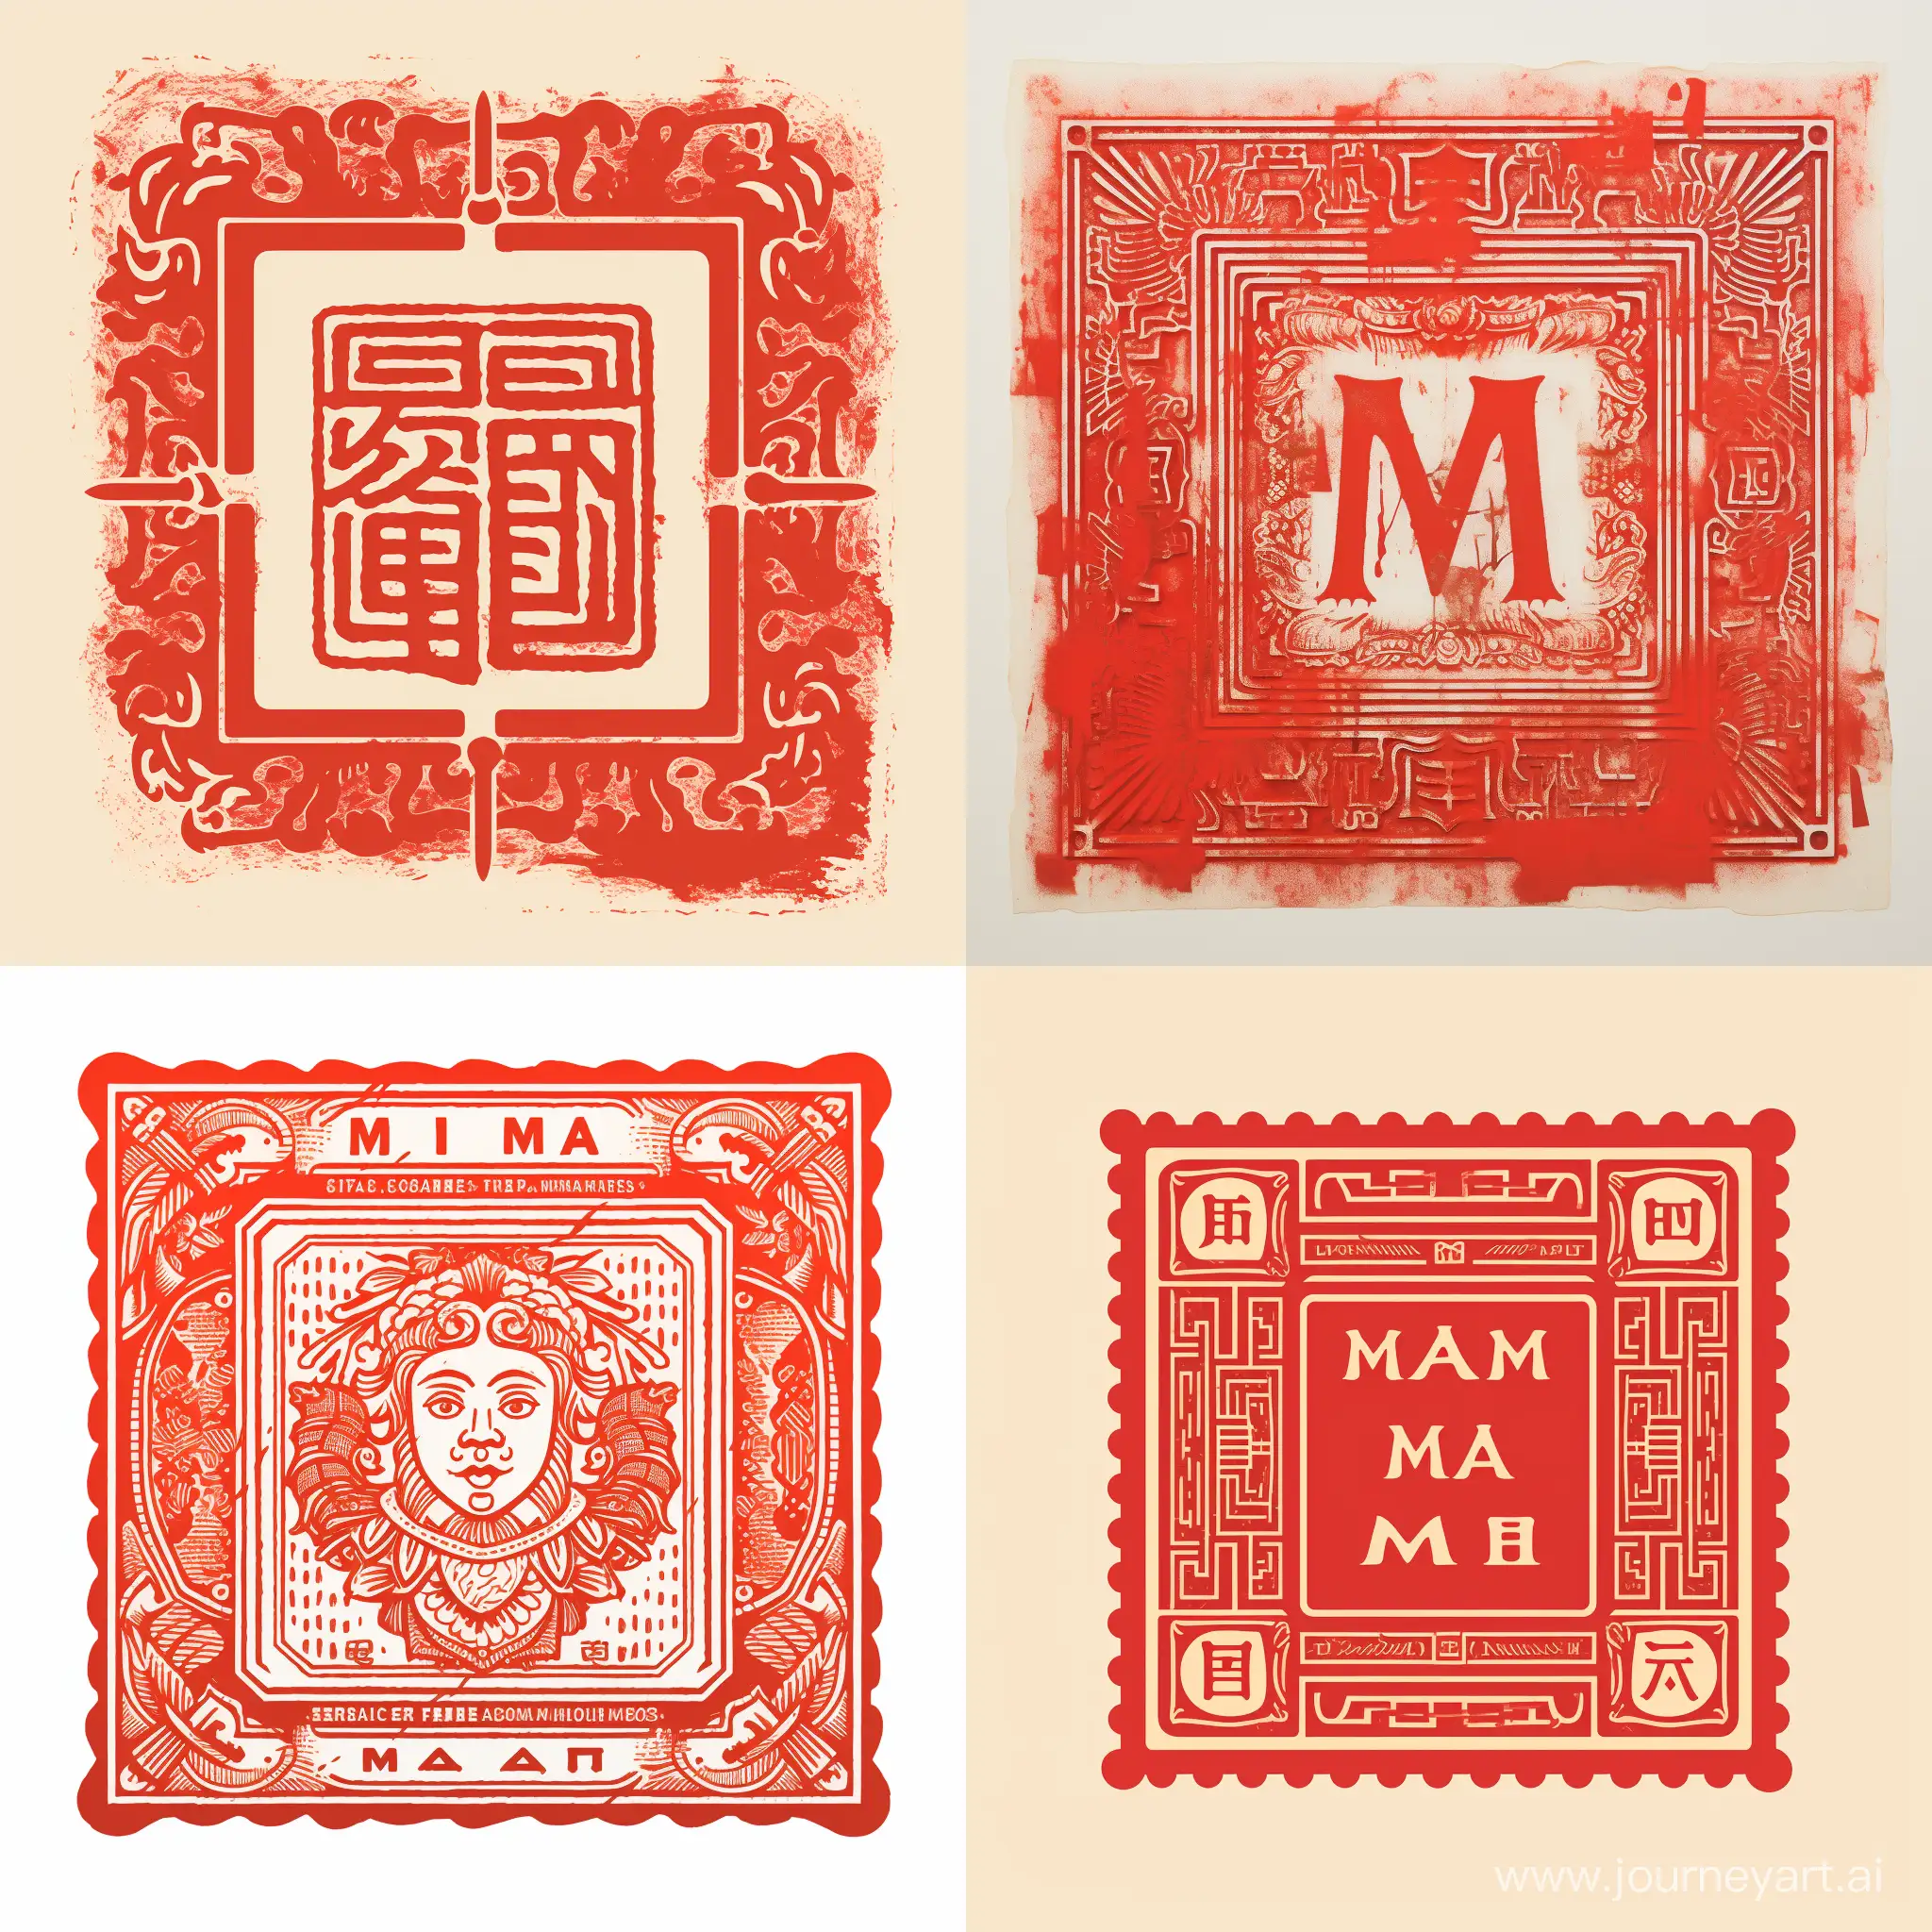 Please generate an image of a square red Chinese chop stamp with correct letters: MIA MAI ART